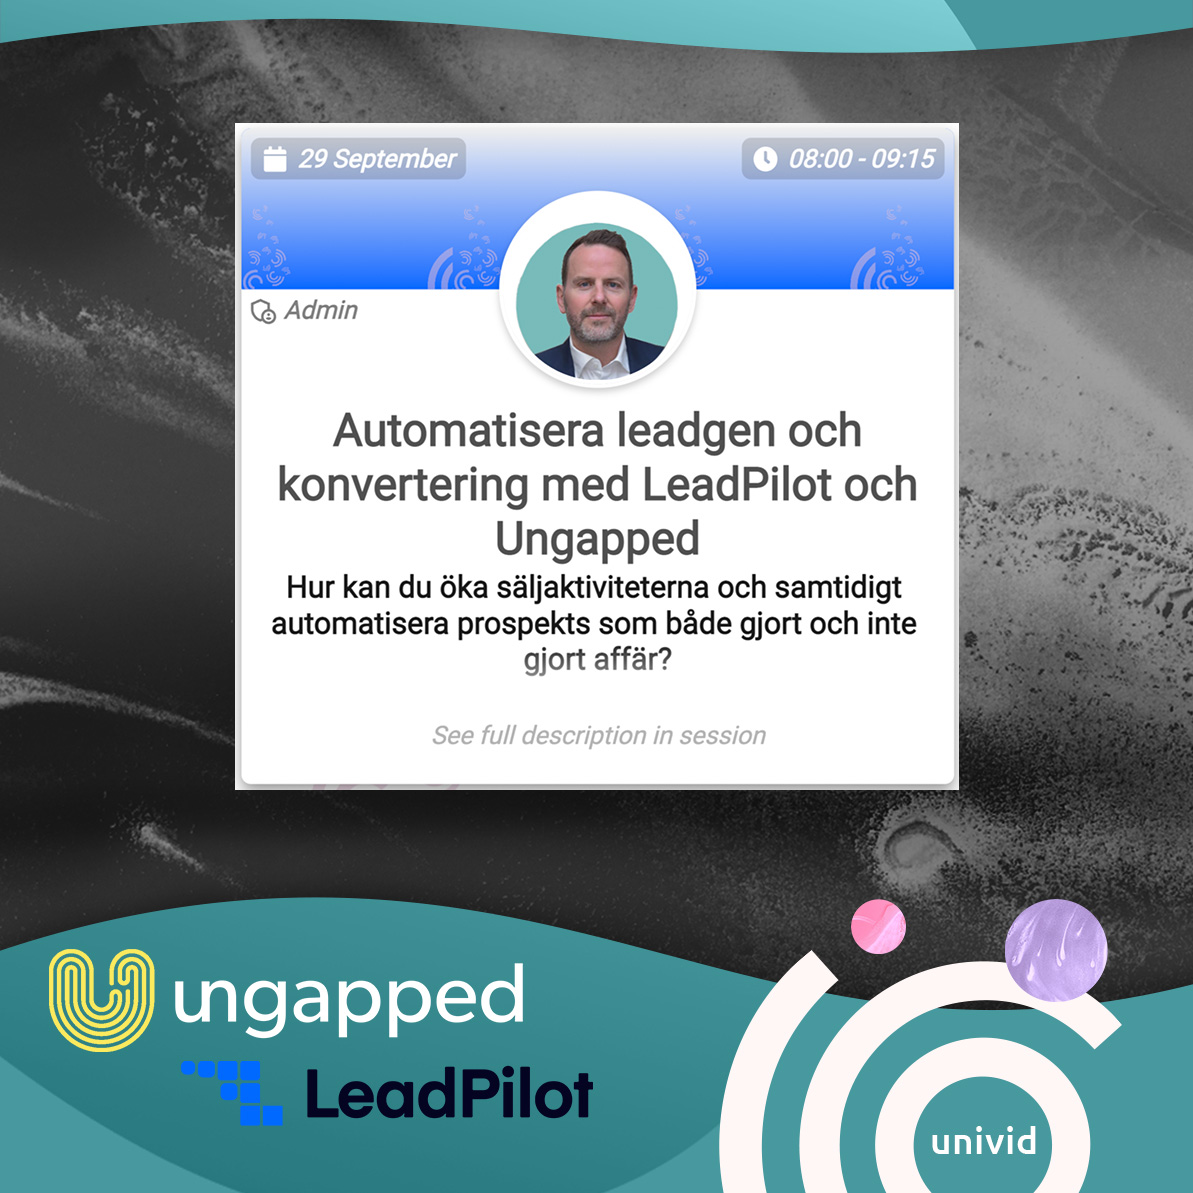 <a target='_blank' rel='noopener noreferrer' href='https://ungapped.com/'>Ungapped</a> and <a target='_blank' rel='noopener noreferrer' href='https://leadpilot.com/'>Leadpilot</a> together hosted a hybrid webinar on the topic of 'Automating lead gen and conversion'. With a great amount of attendees tuning in both digitally and physically - this webinar was hosted flawlessly in a hybrid fashion (without any production company). The digital participants enjoyed both interacting via chat and live reactions, as well as a final launch of some virtual confetti!